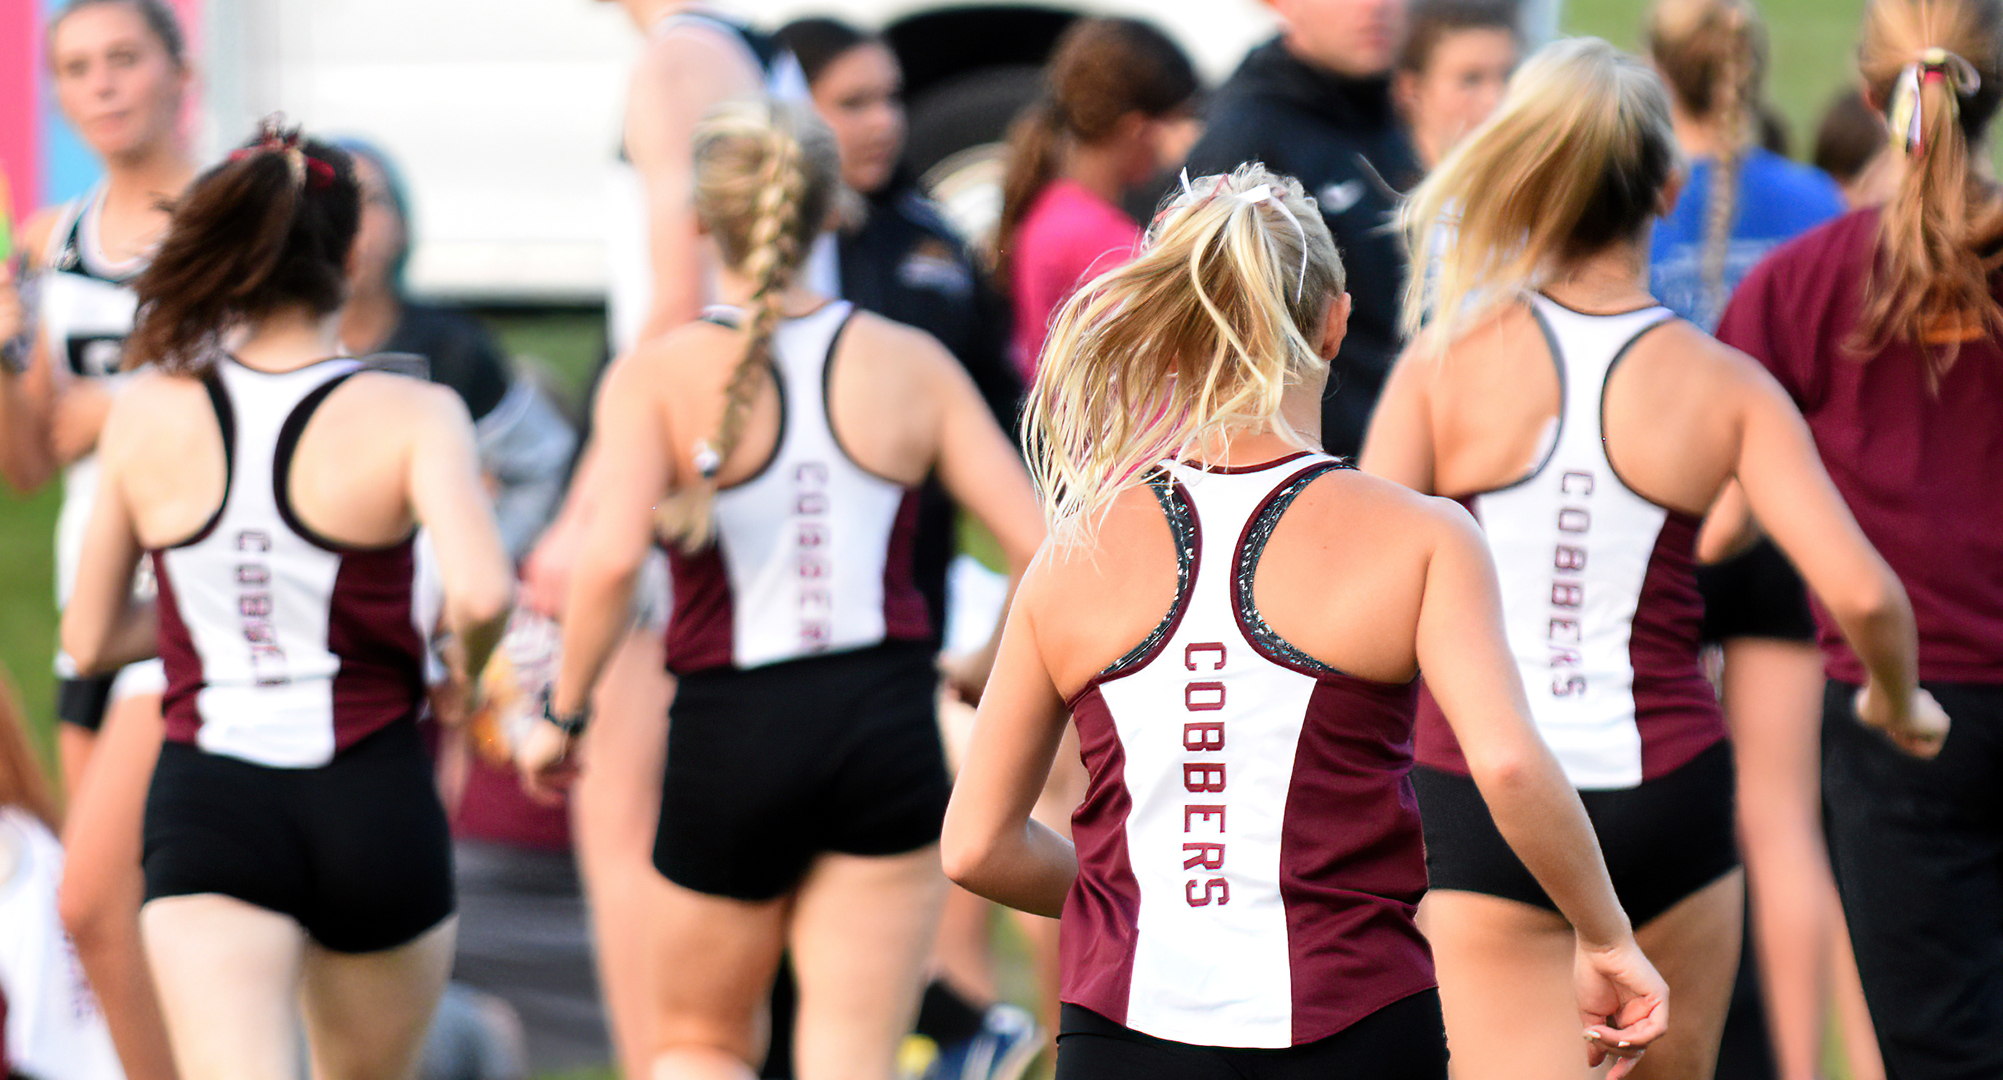 Concordia used the balance of their team, and season-best marks, to finish seventh in the 20-team Tori Neubauer Invite hosted by Wis.-La Crosse.